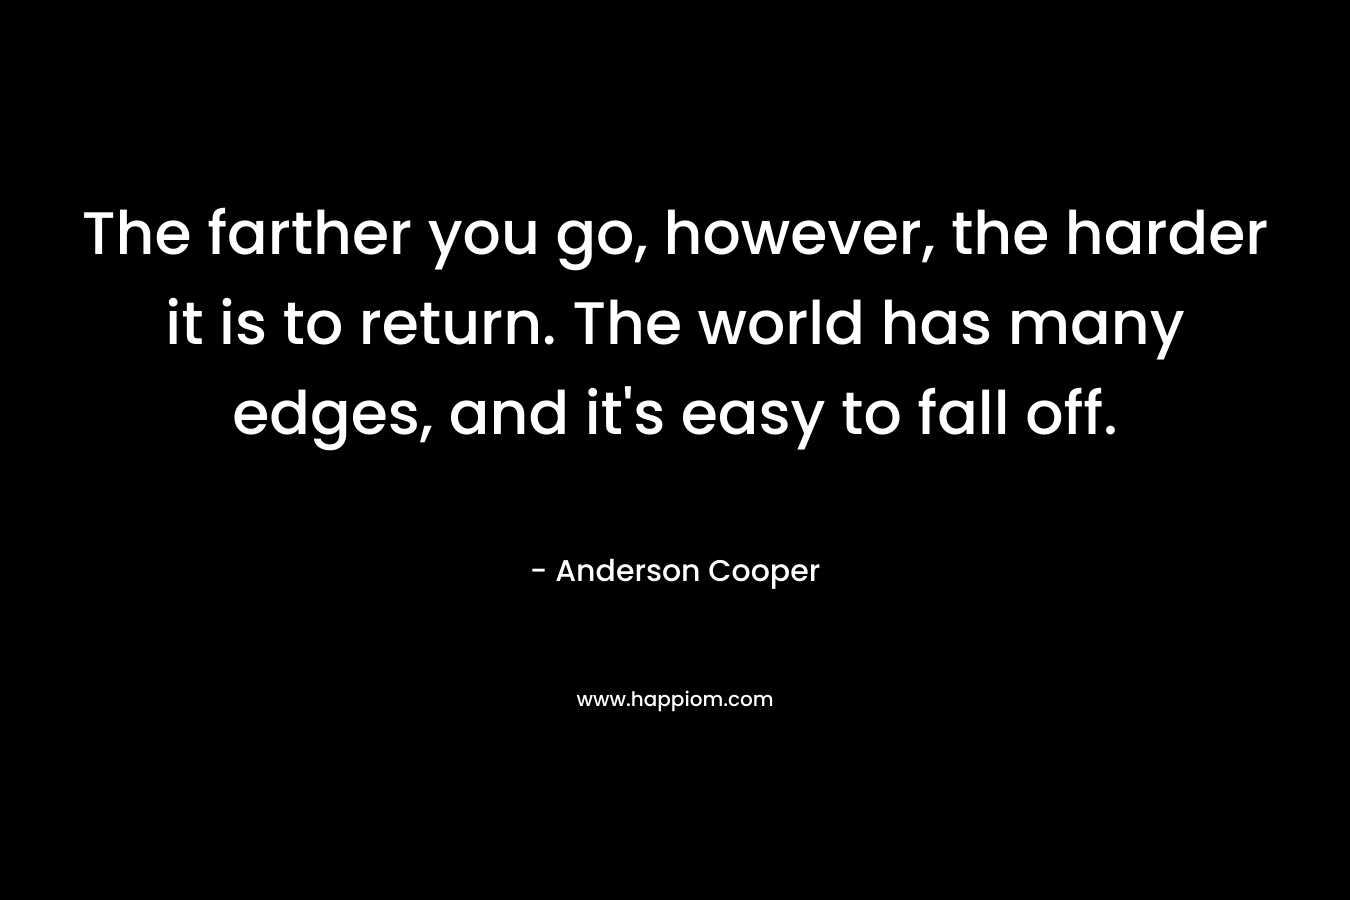 The farther you go, however, the harder it is to return. The world has many edges, and it’s easy to fall off. – Anderson Cooper